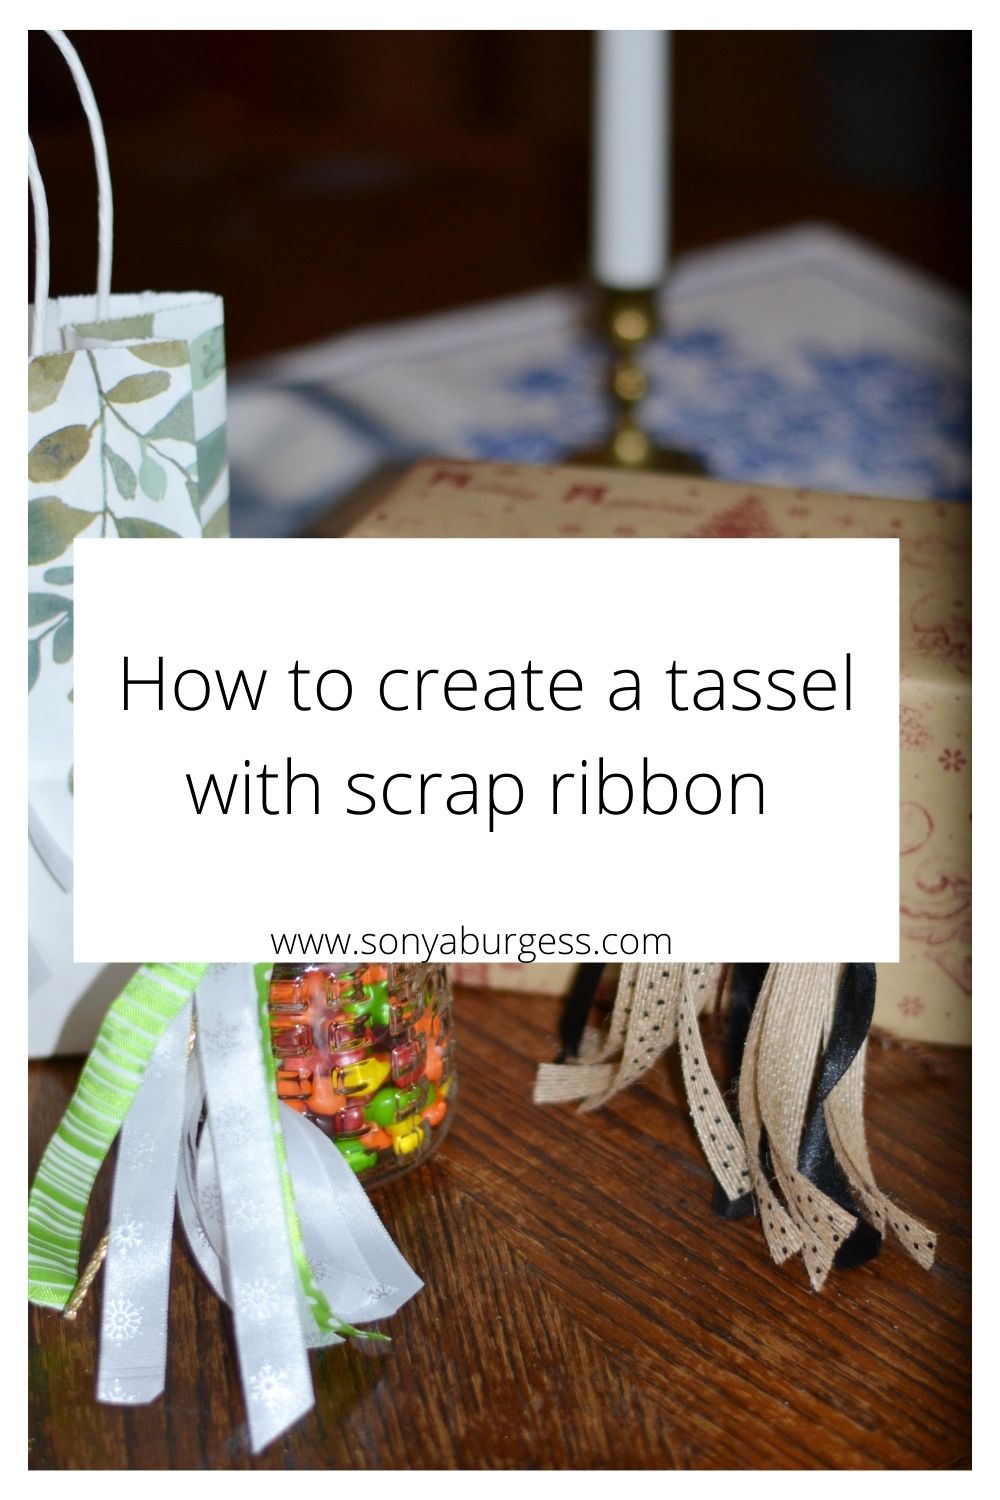 How to create a ribbon tassel with scrap ribbon